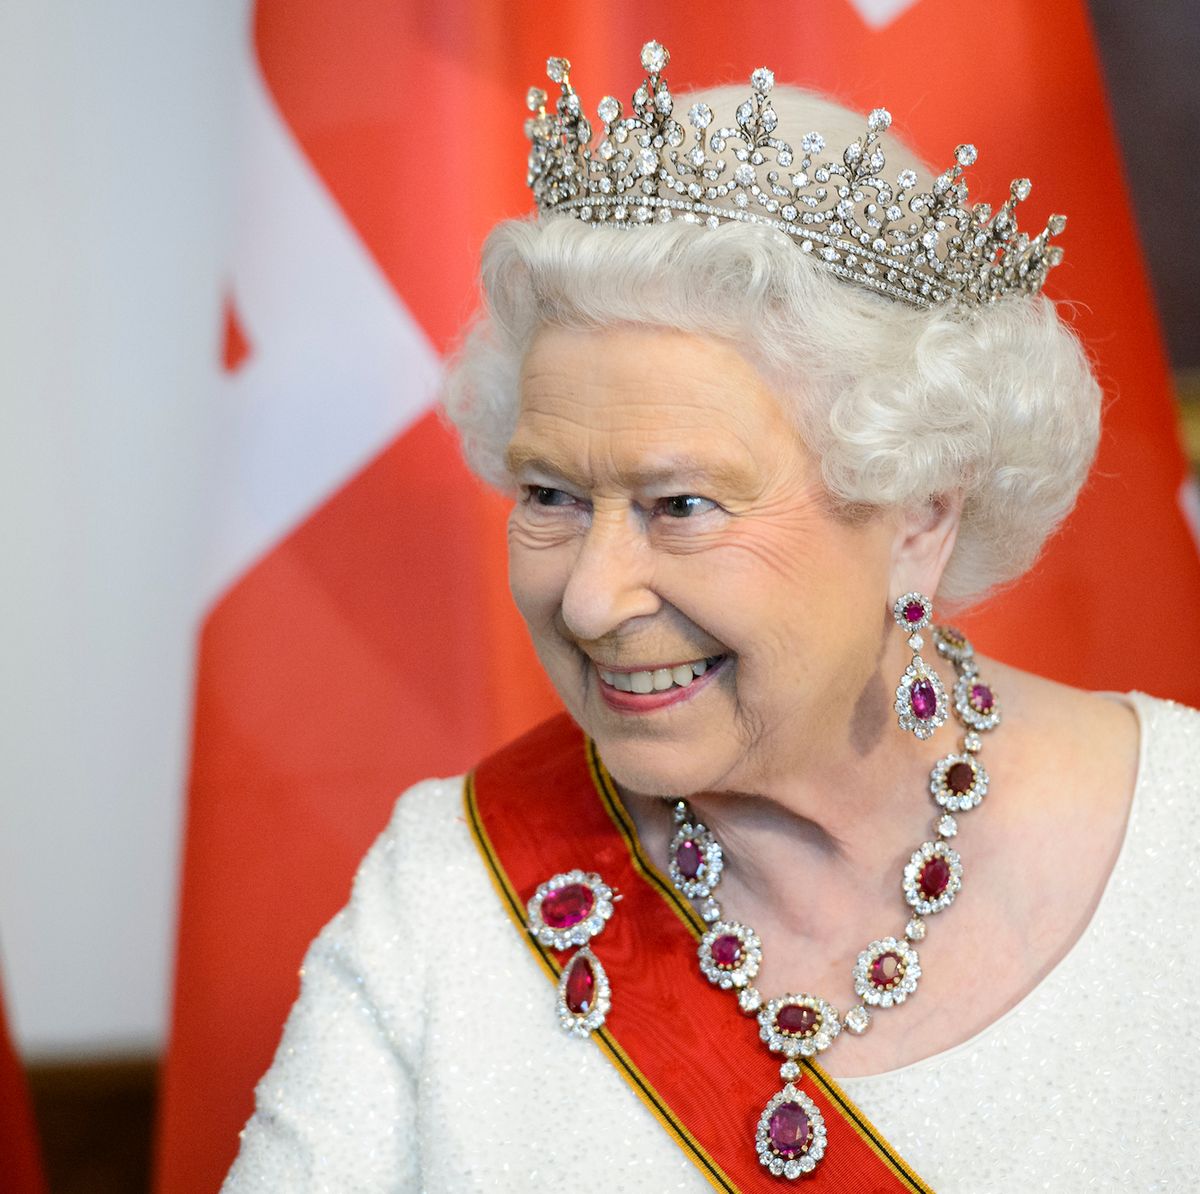 All the random things owned by Queen Elizabeth (swans included)